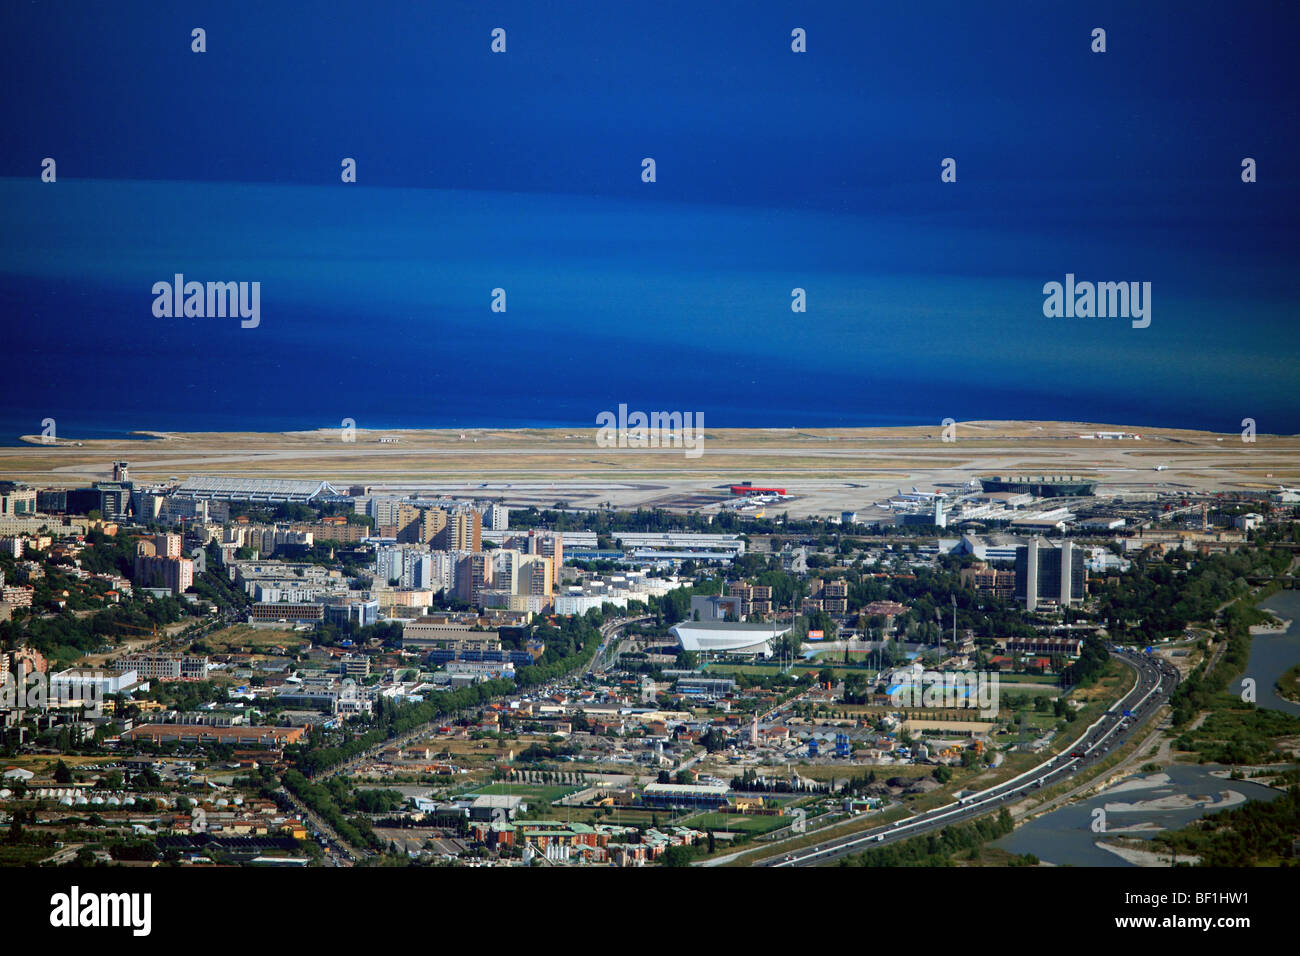 The Nice city international airport close to the sea Stock Photo